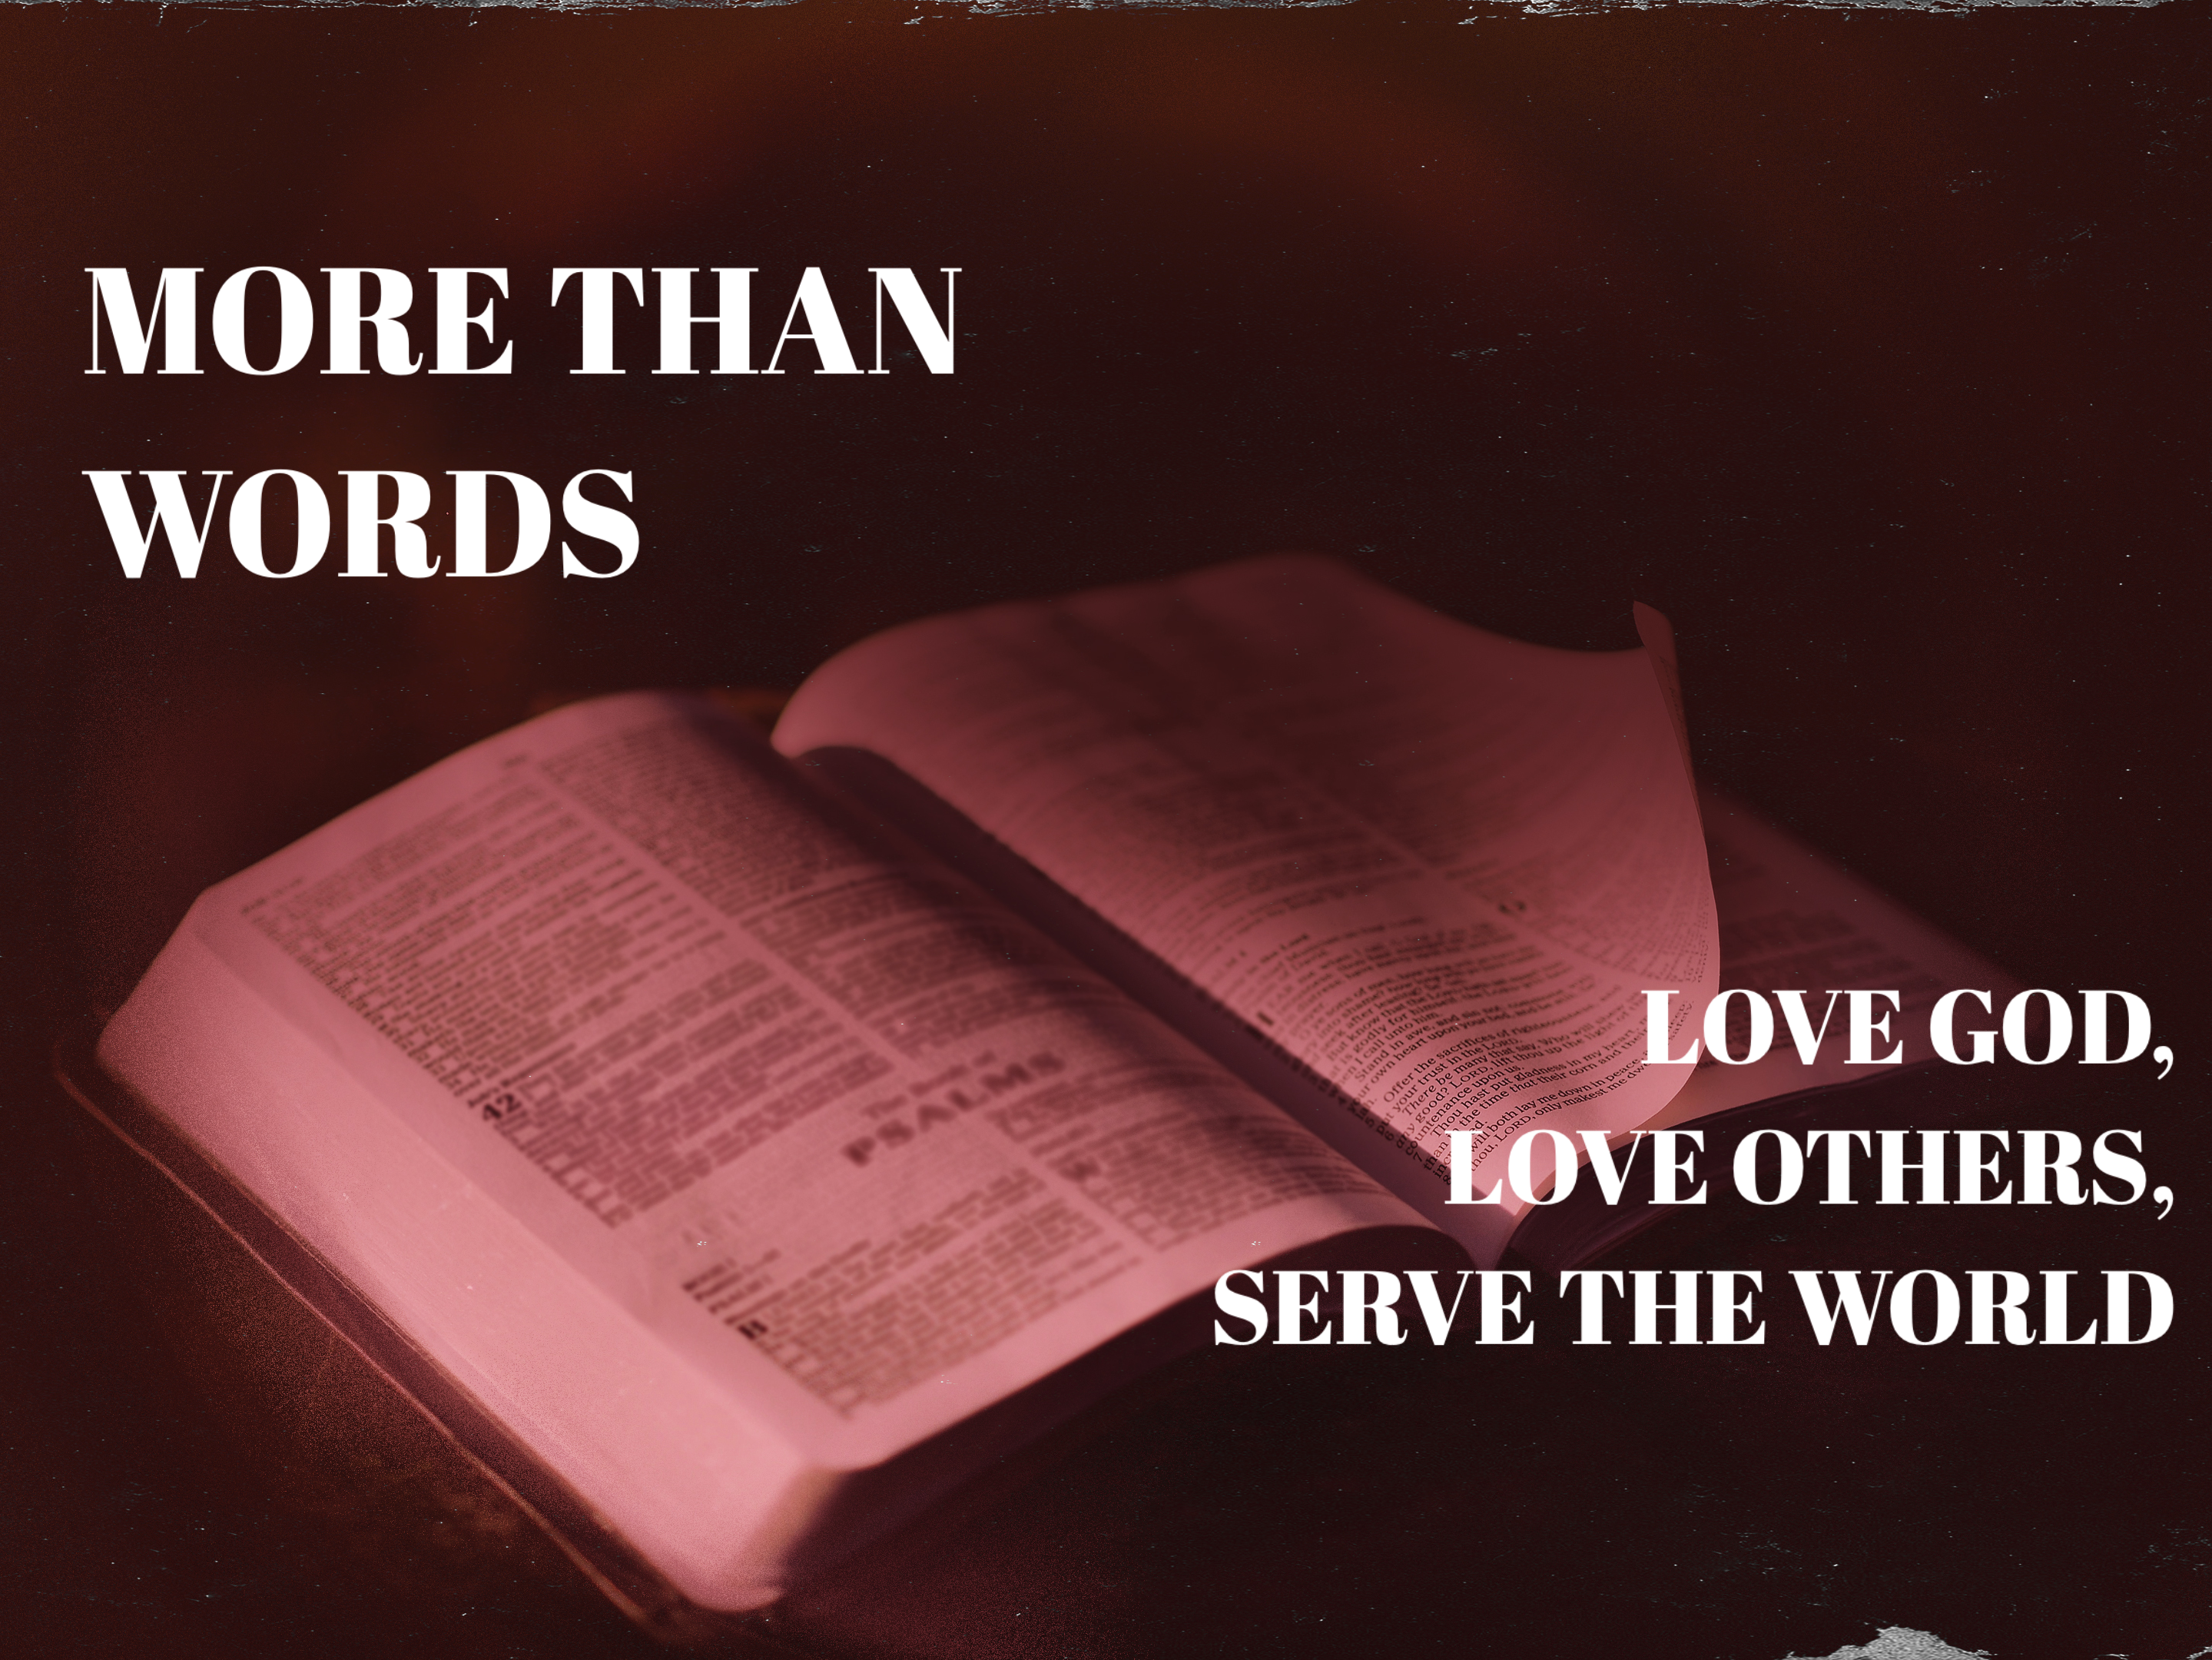 7 Words: Love God, Love Others, Serve the World